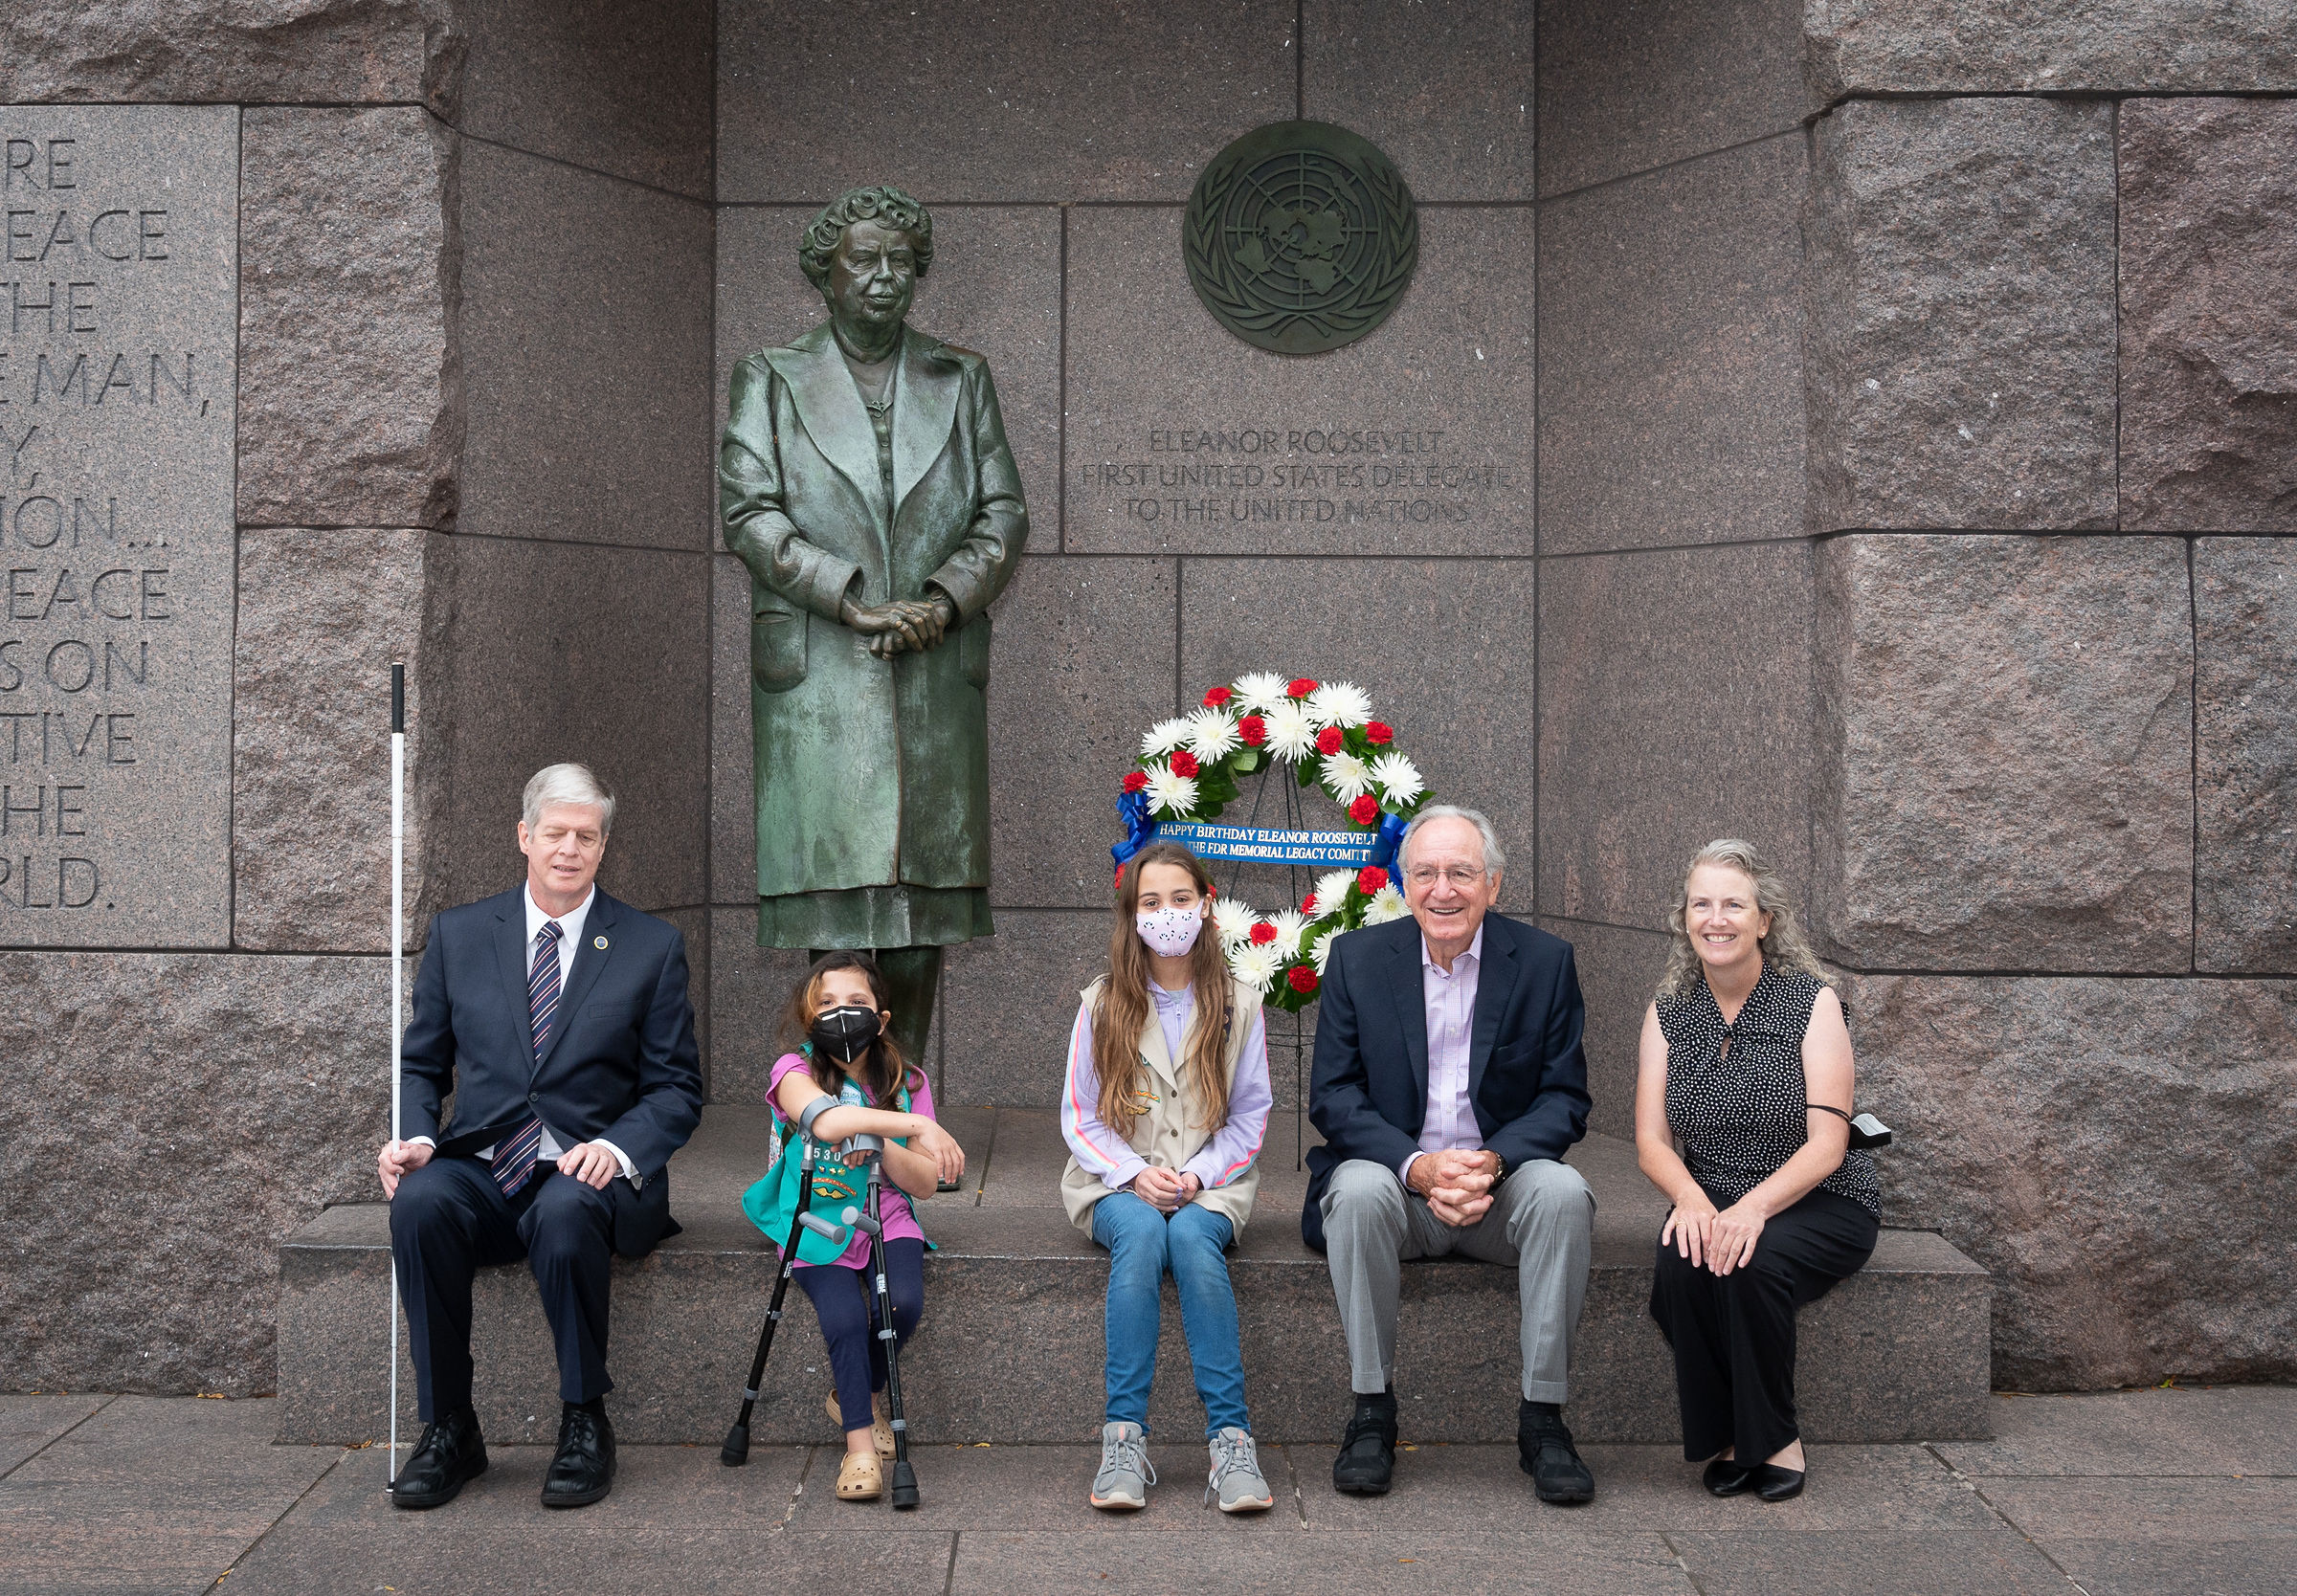 Pictured from left to right: Dr. Kirk Adams, President and CEO of the American Foundation for the Blind (AFB), Ari Paz Pasa, Girl Scout Troop 4720, Eva Lake, Girl Scout Troop 4720, U.S. Senator (Ret) Tom Harkin and Mary Dolan, Co-Founder and Executive Director of the FDR Memorial Legacy Committee sitting in front of the Eleanor Roosevelt statue in Washington, DC. 